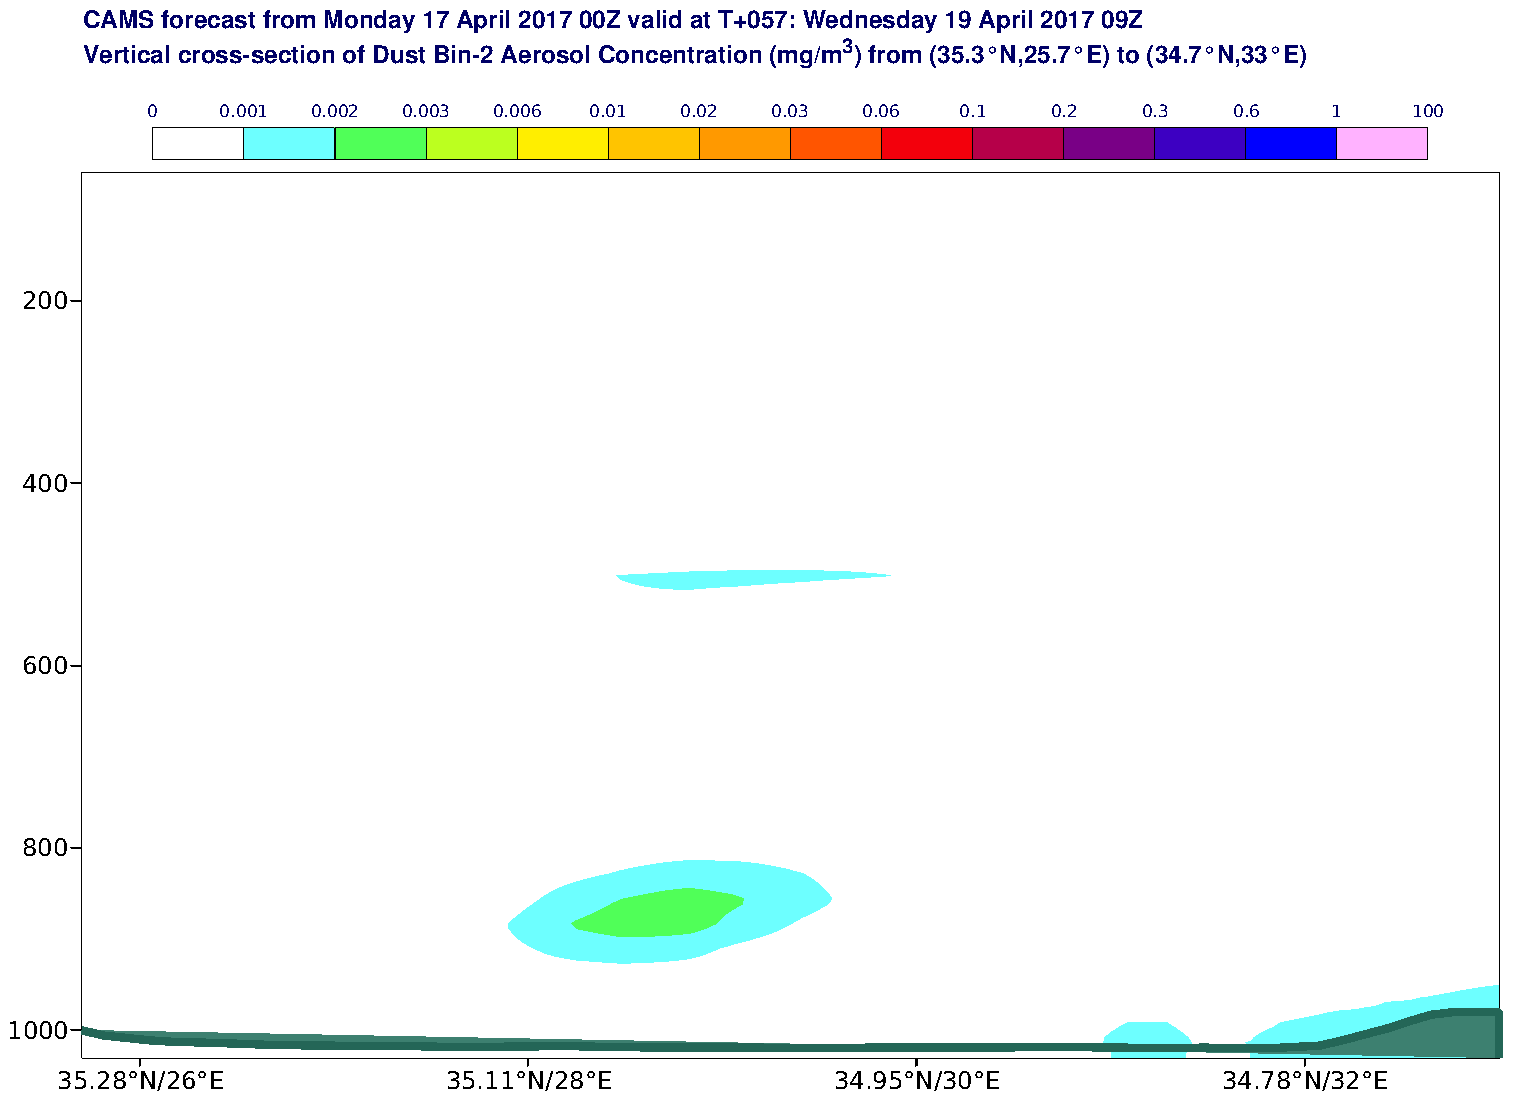 Vertical cross-section of Dust Bin-2 Aerosol Concentration (mg/m3) valid at T57 - 2017-04-19 09:00